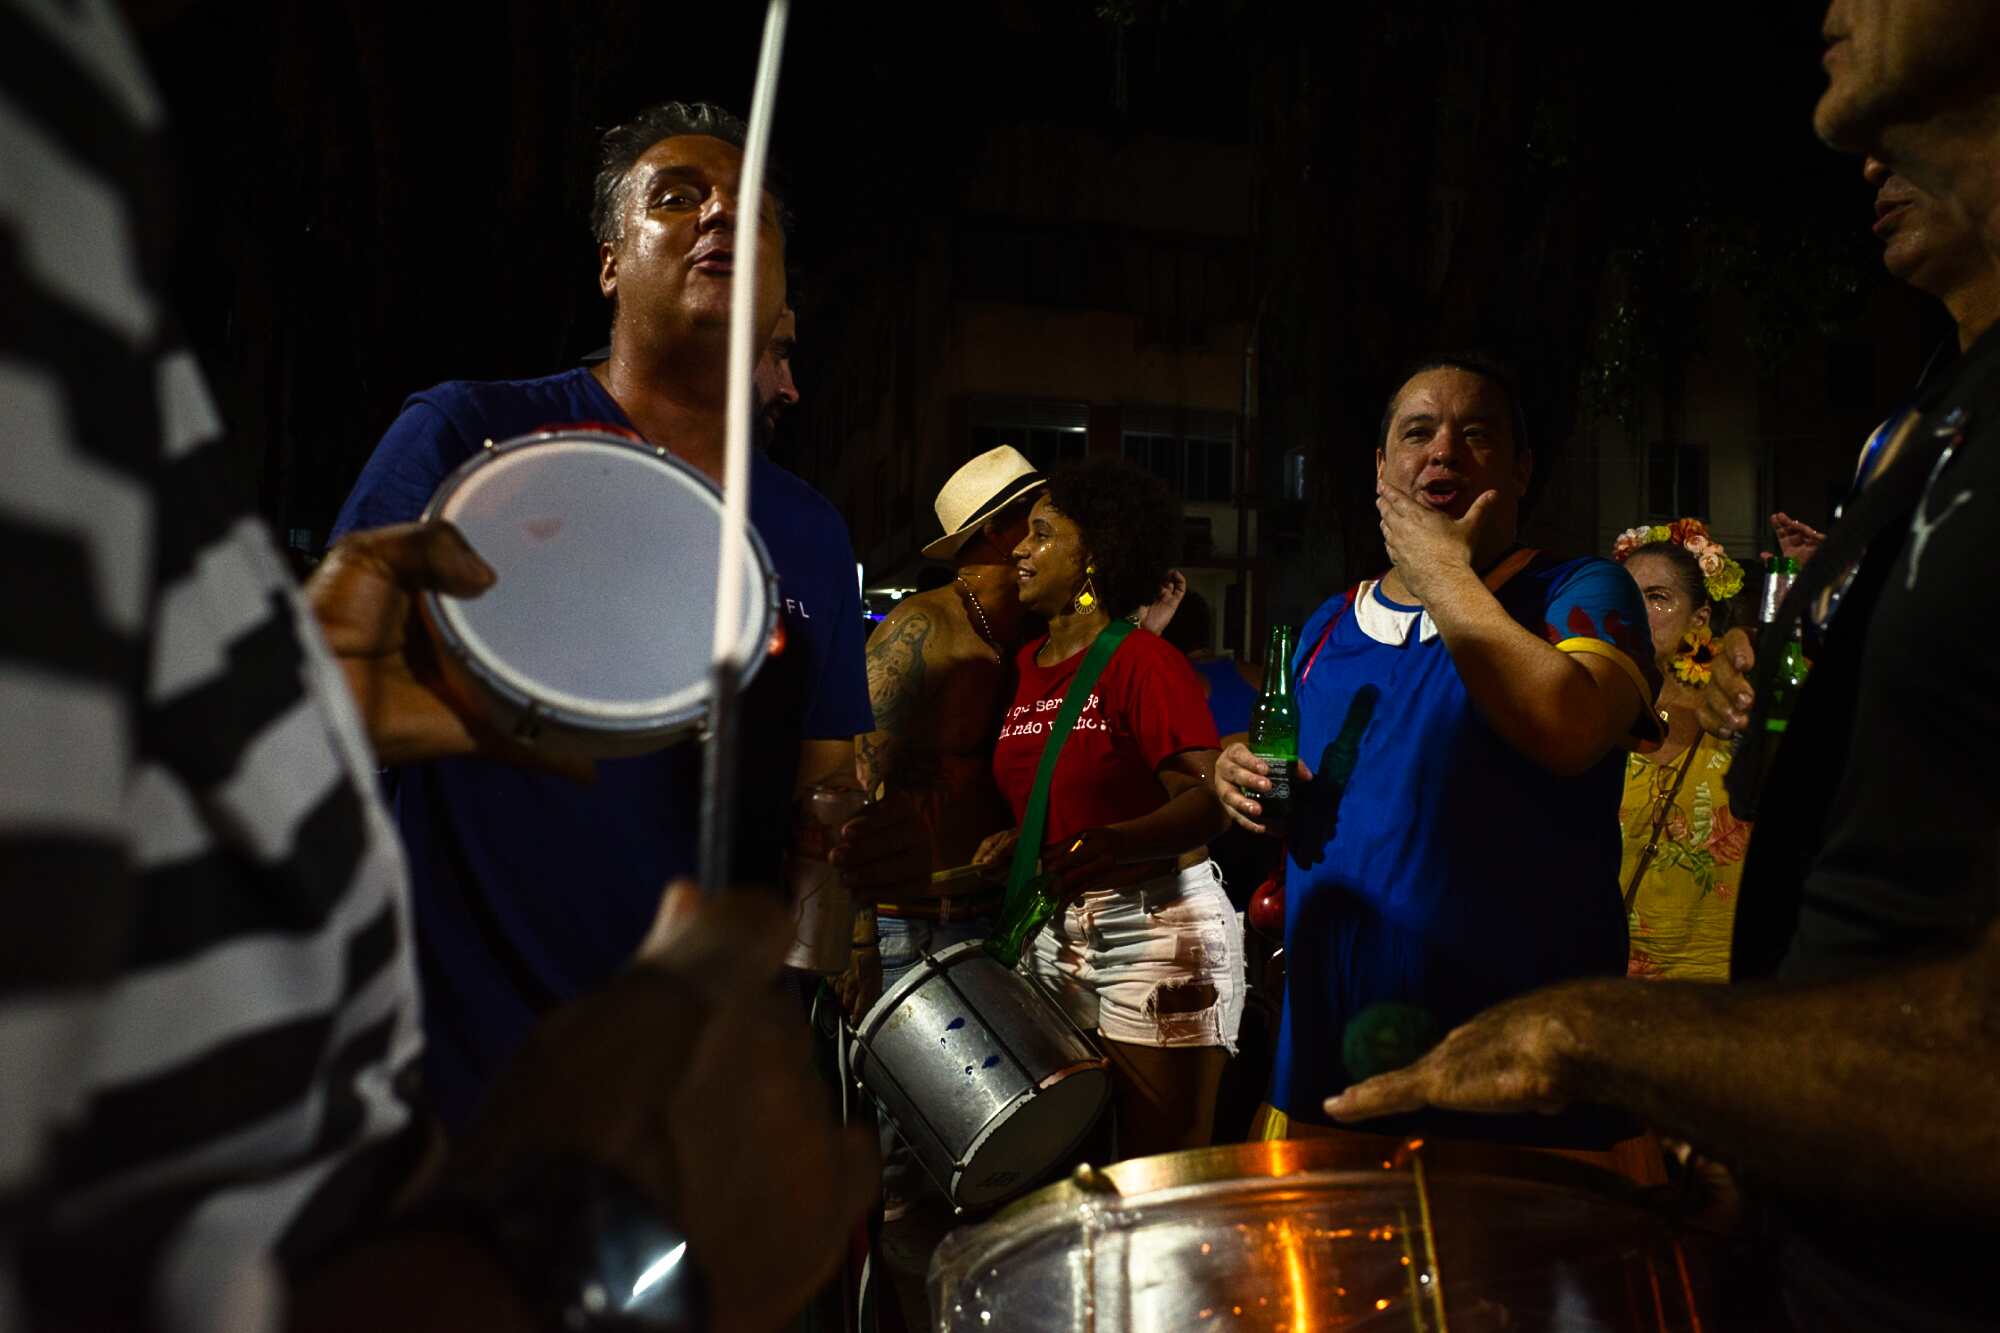 People singing and playing instruments during carnaval in Rio de Janeiro after editing.